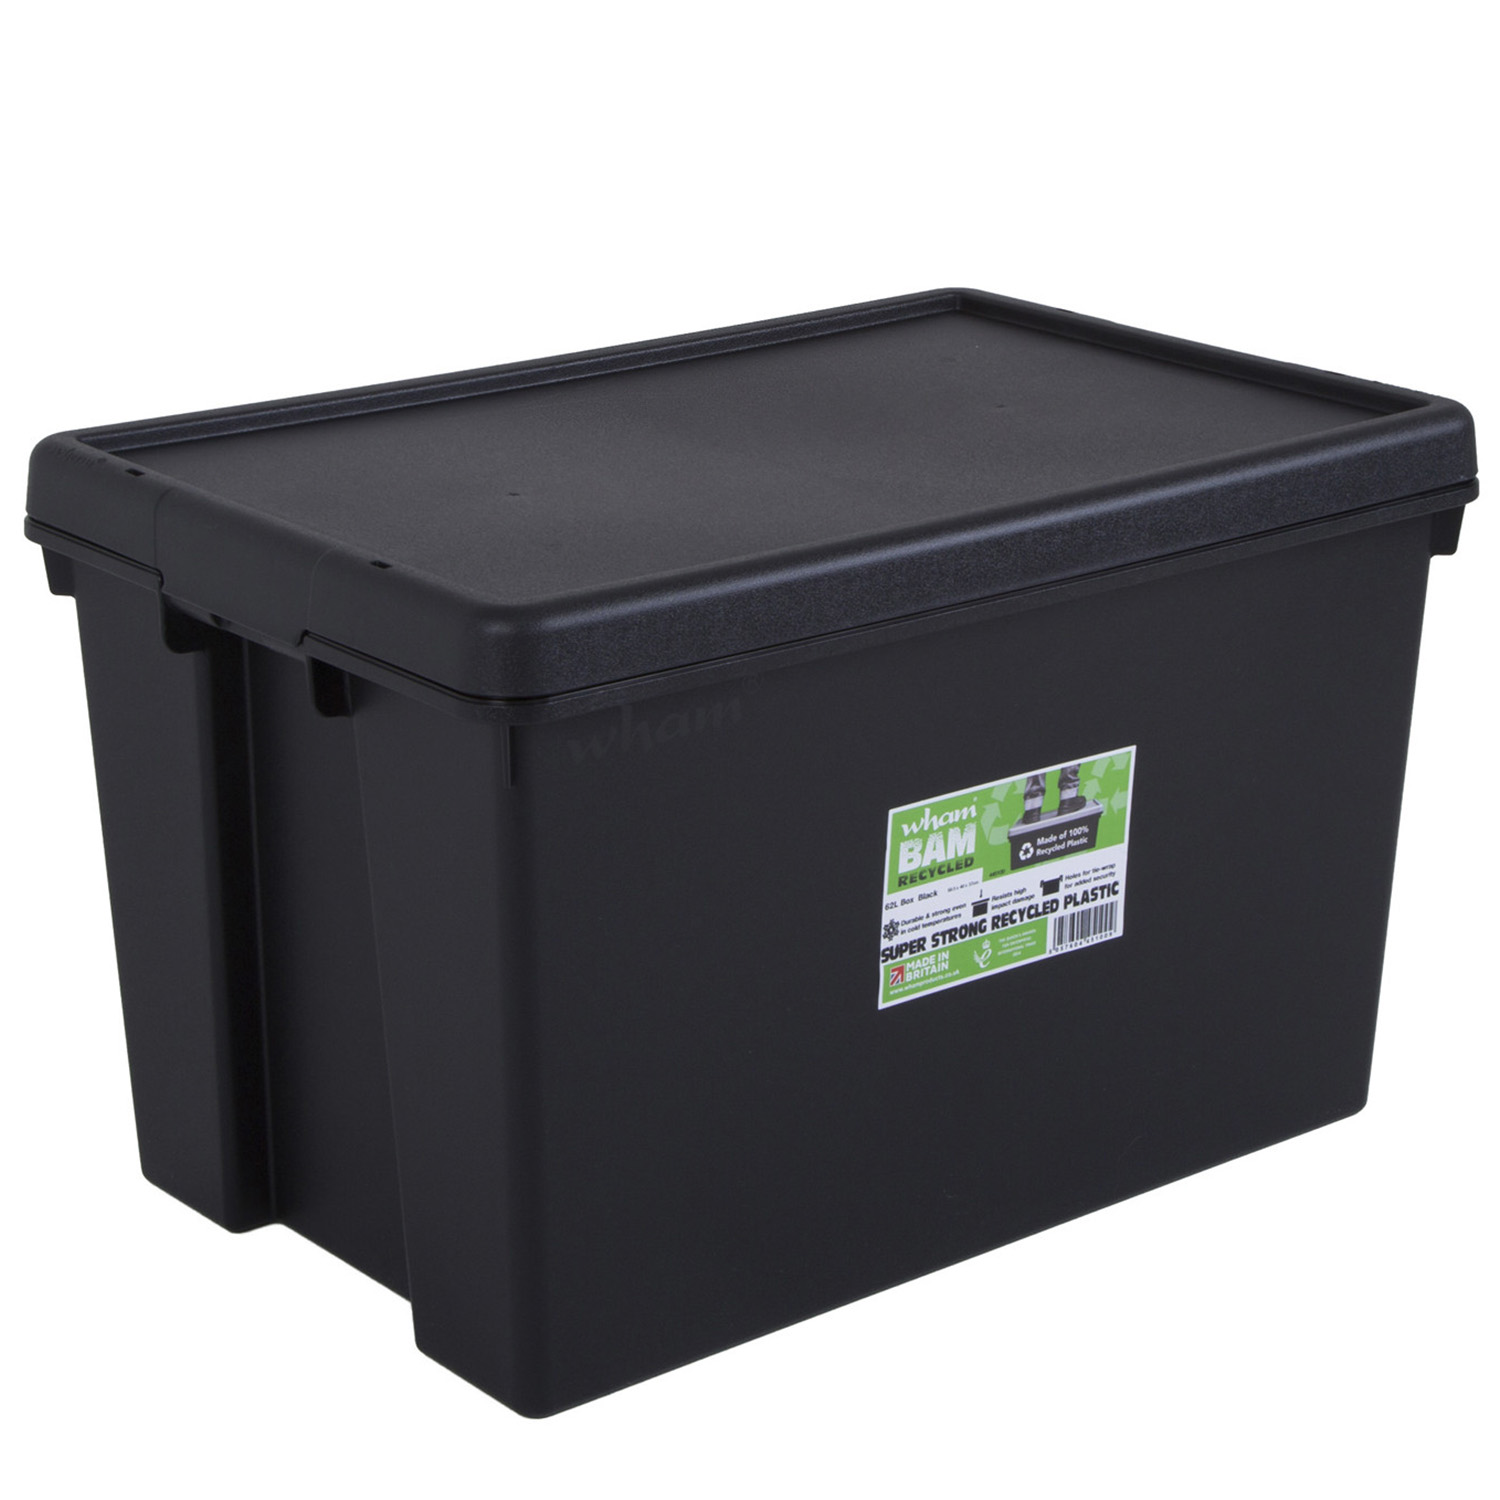 Wham Bam Black Recycled Storage Box with Lid 62L Image